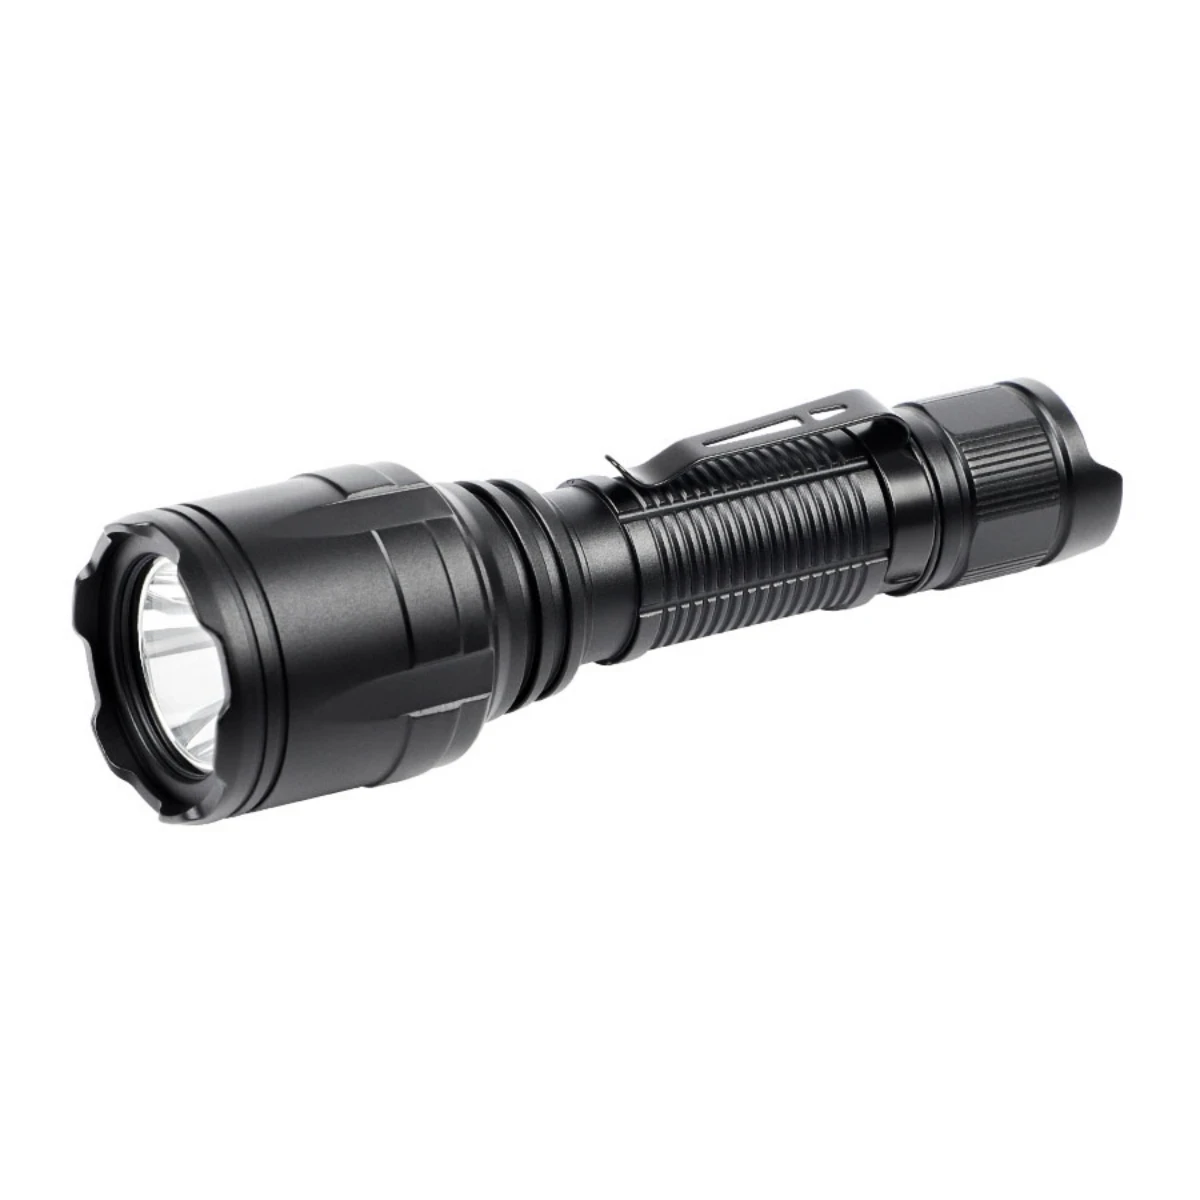 

Odepro NT23 1500 Lumen Powerful Small Tactical Flashlights with Clip 4 Light Modes Rechargeable LED Flashlight with Mode Memory